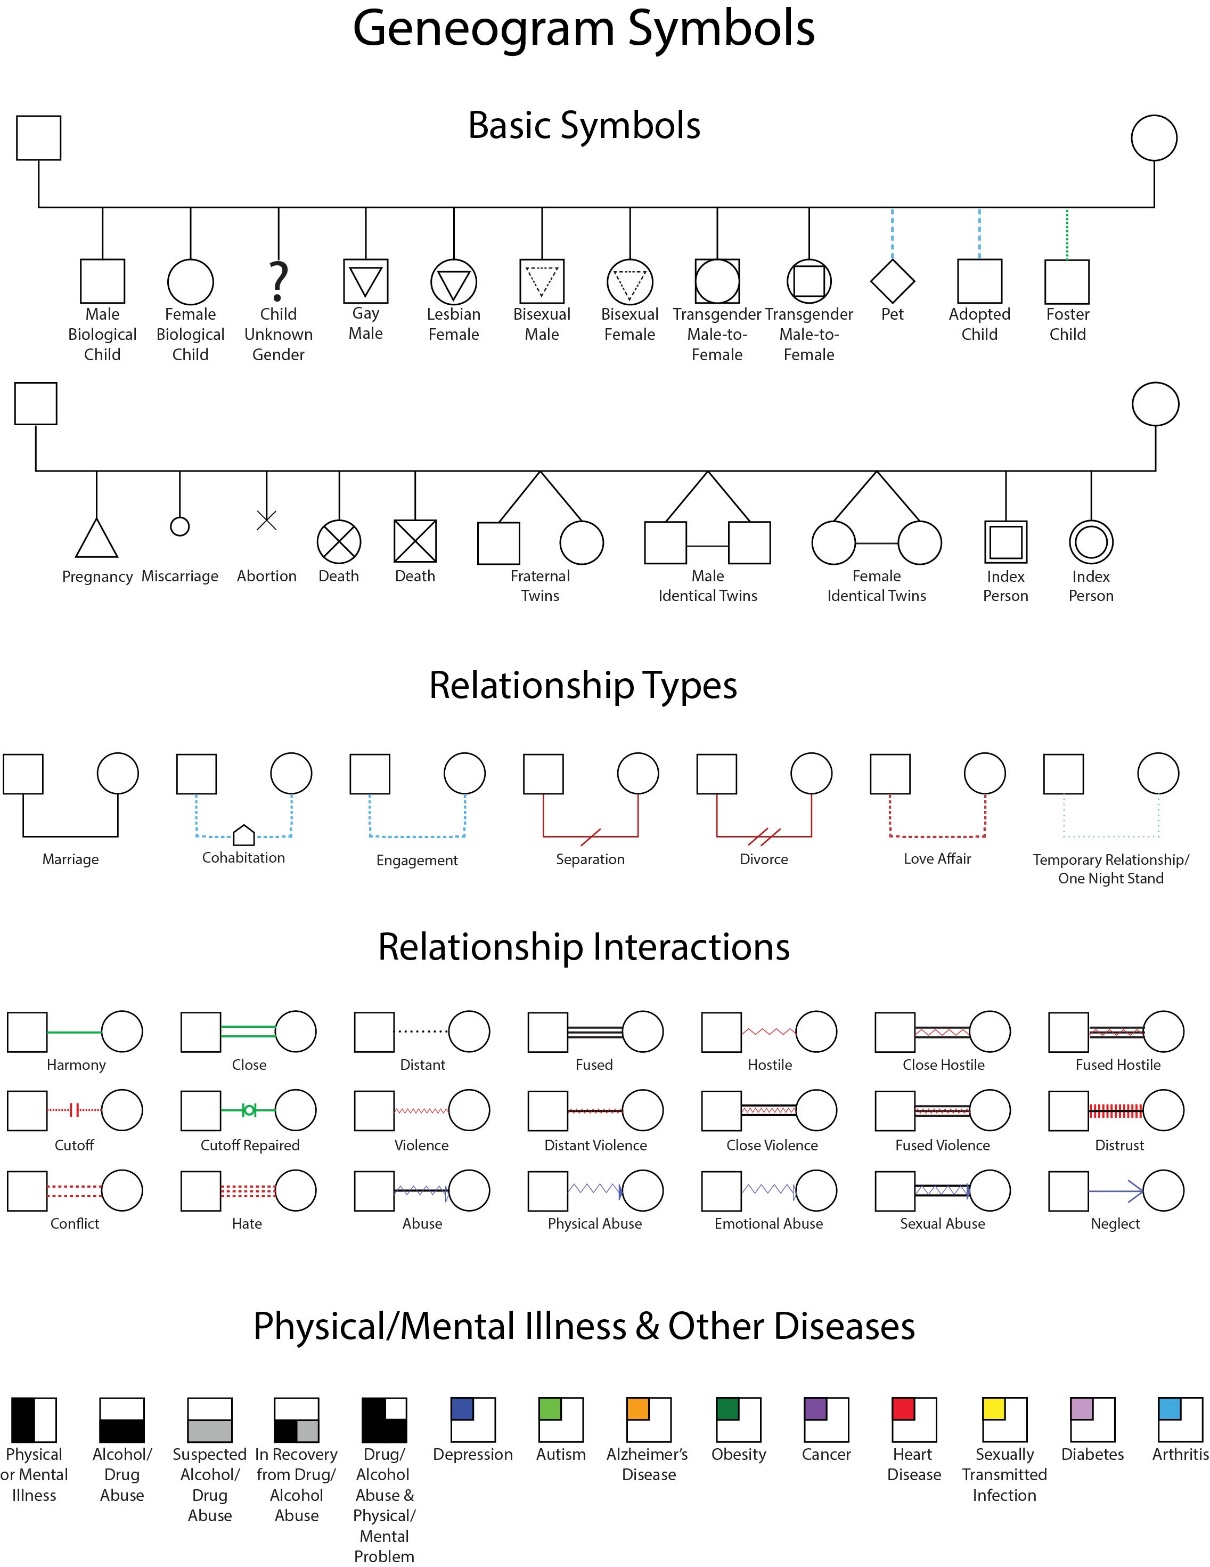 Geneogram symbols including basic symbols, relationship types, relationship interactions, and Physical/mental illness & other diseases.